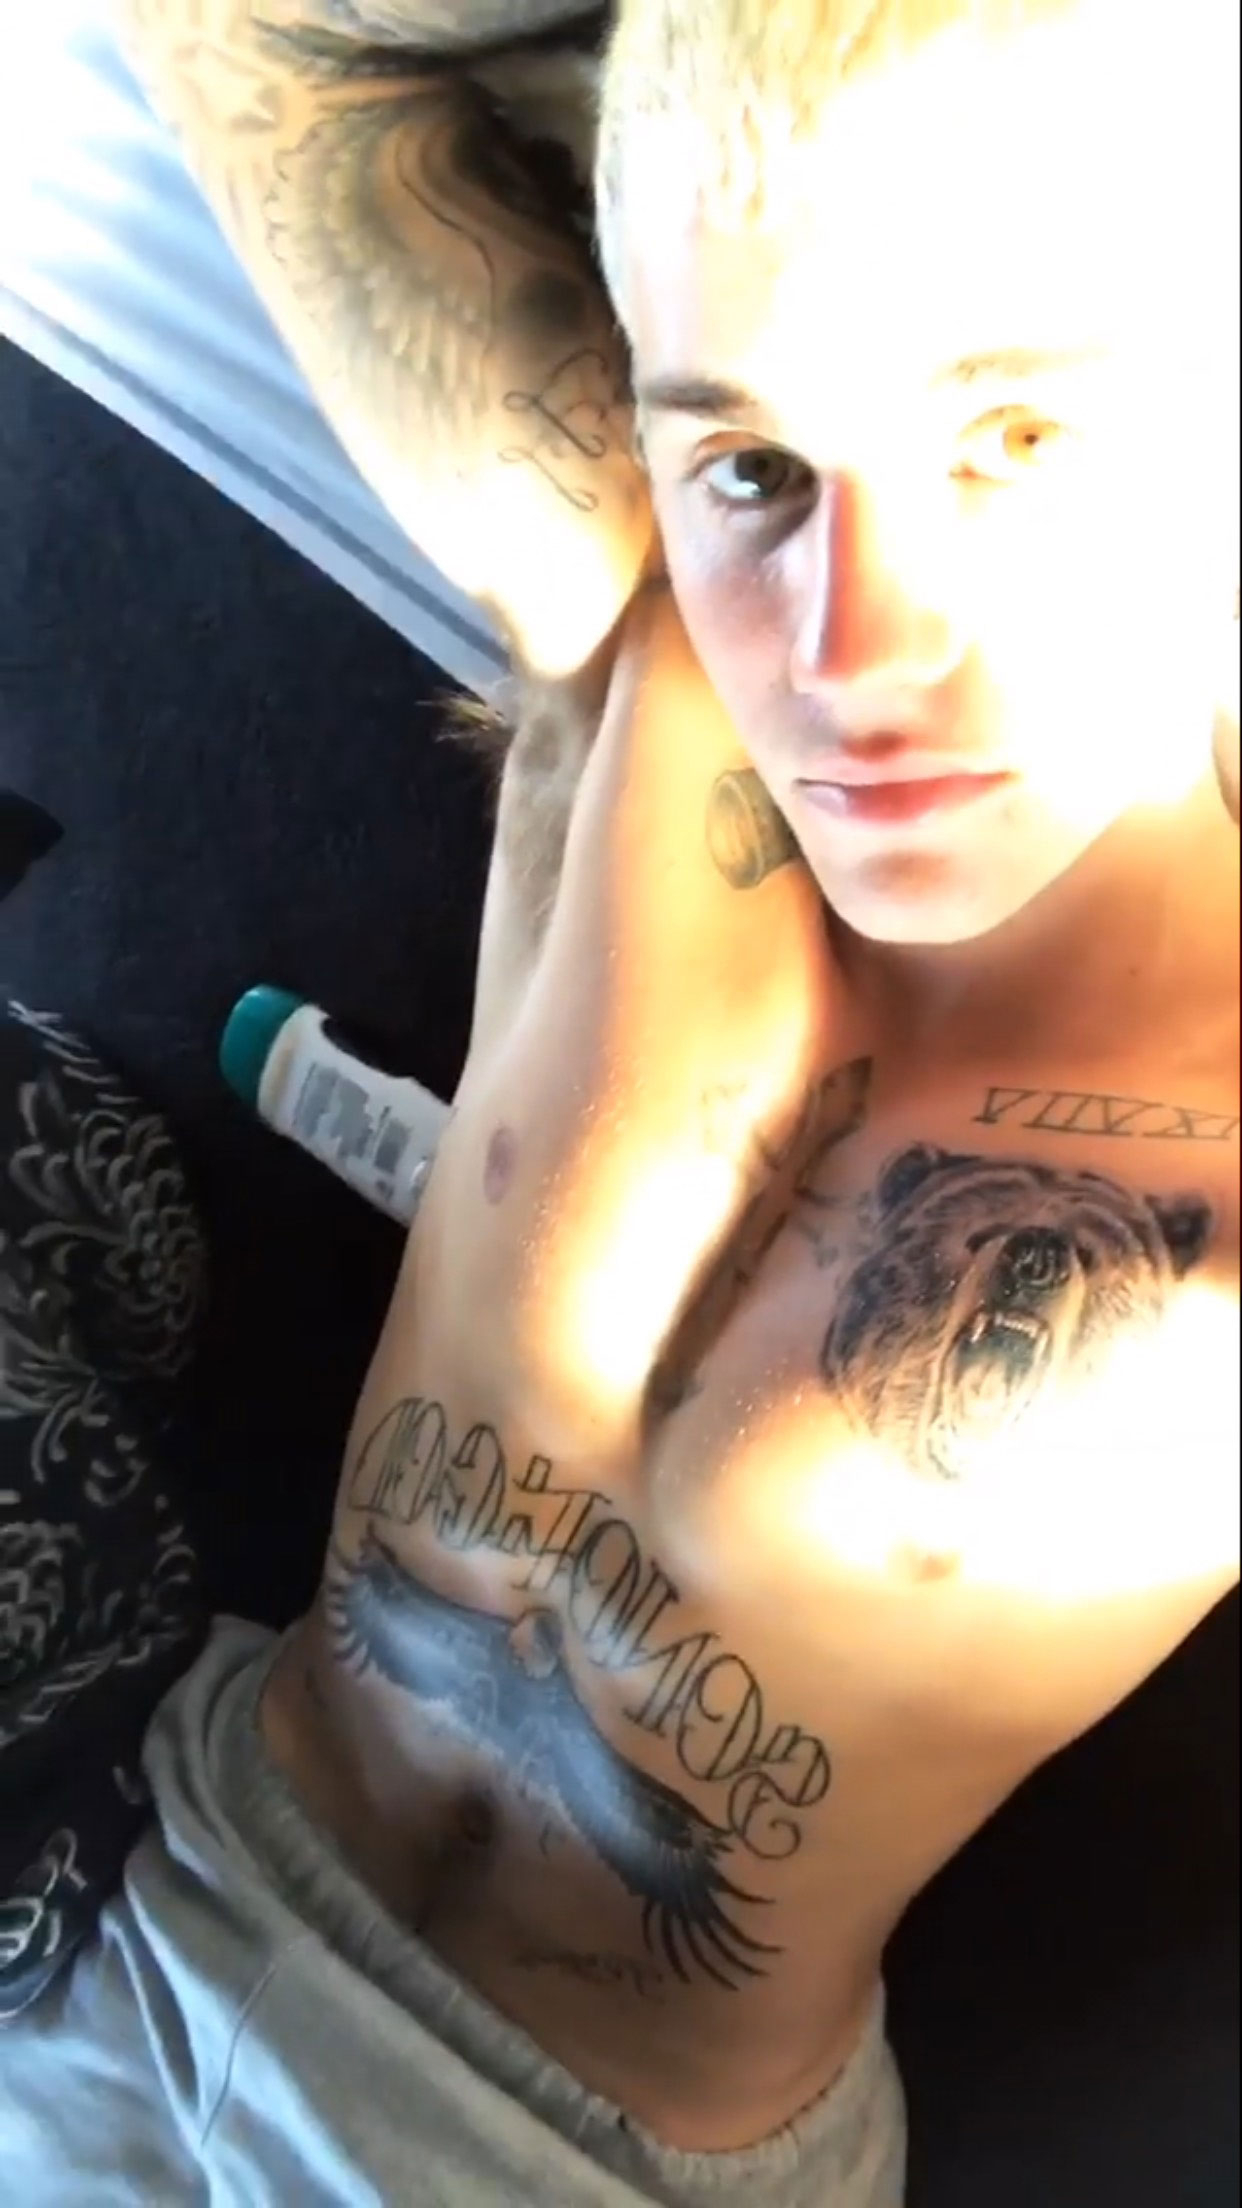 Justin Bieber Reveals Two New Tattoos in Shirtless Selfie